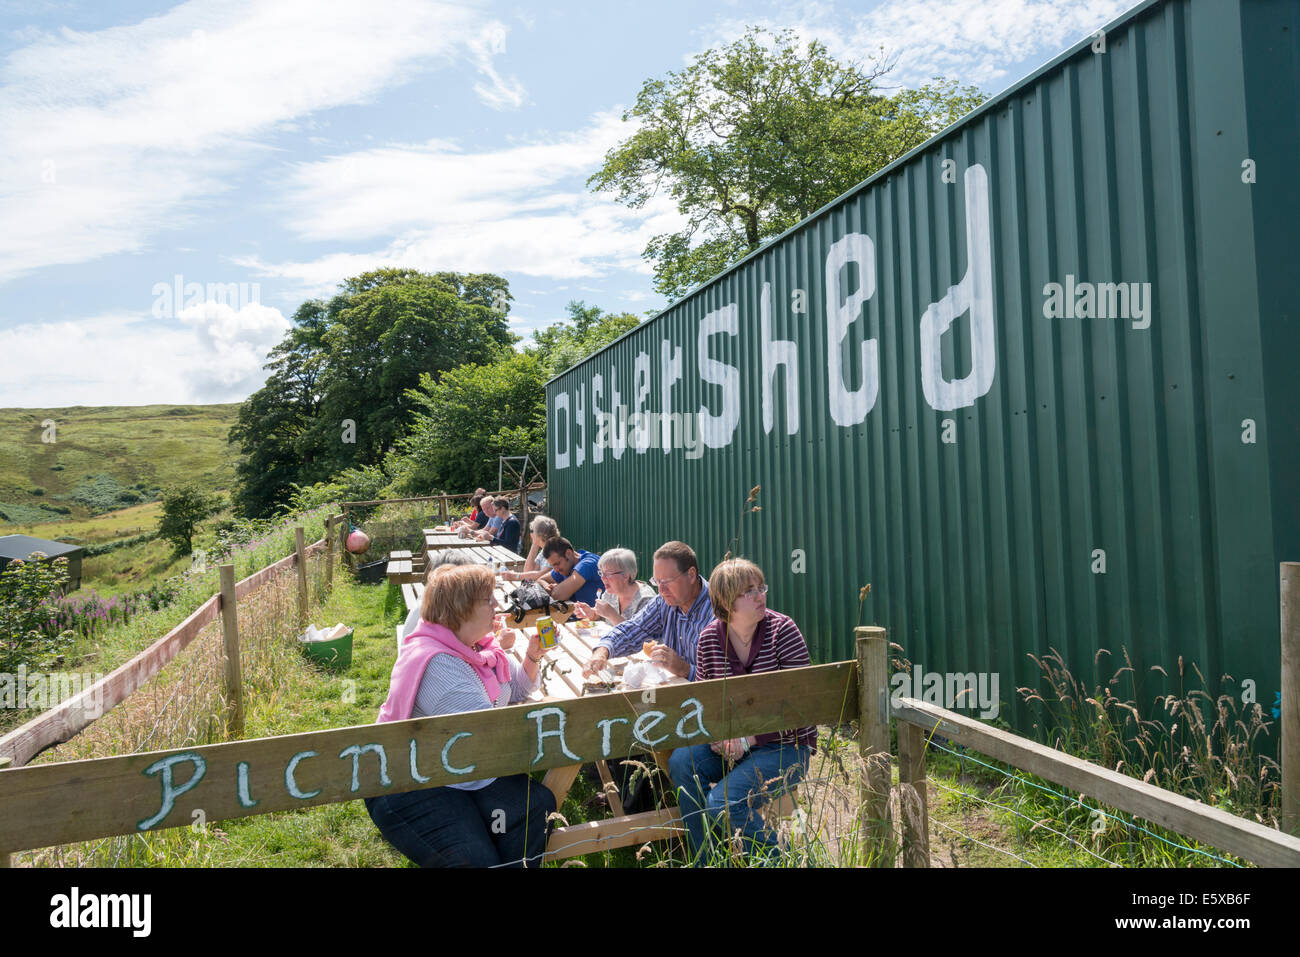 The Oyster Shed seafood shop and restaurant Carbost Isle of Skye Scotland with people sitting outside eating at tables Stock Photo